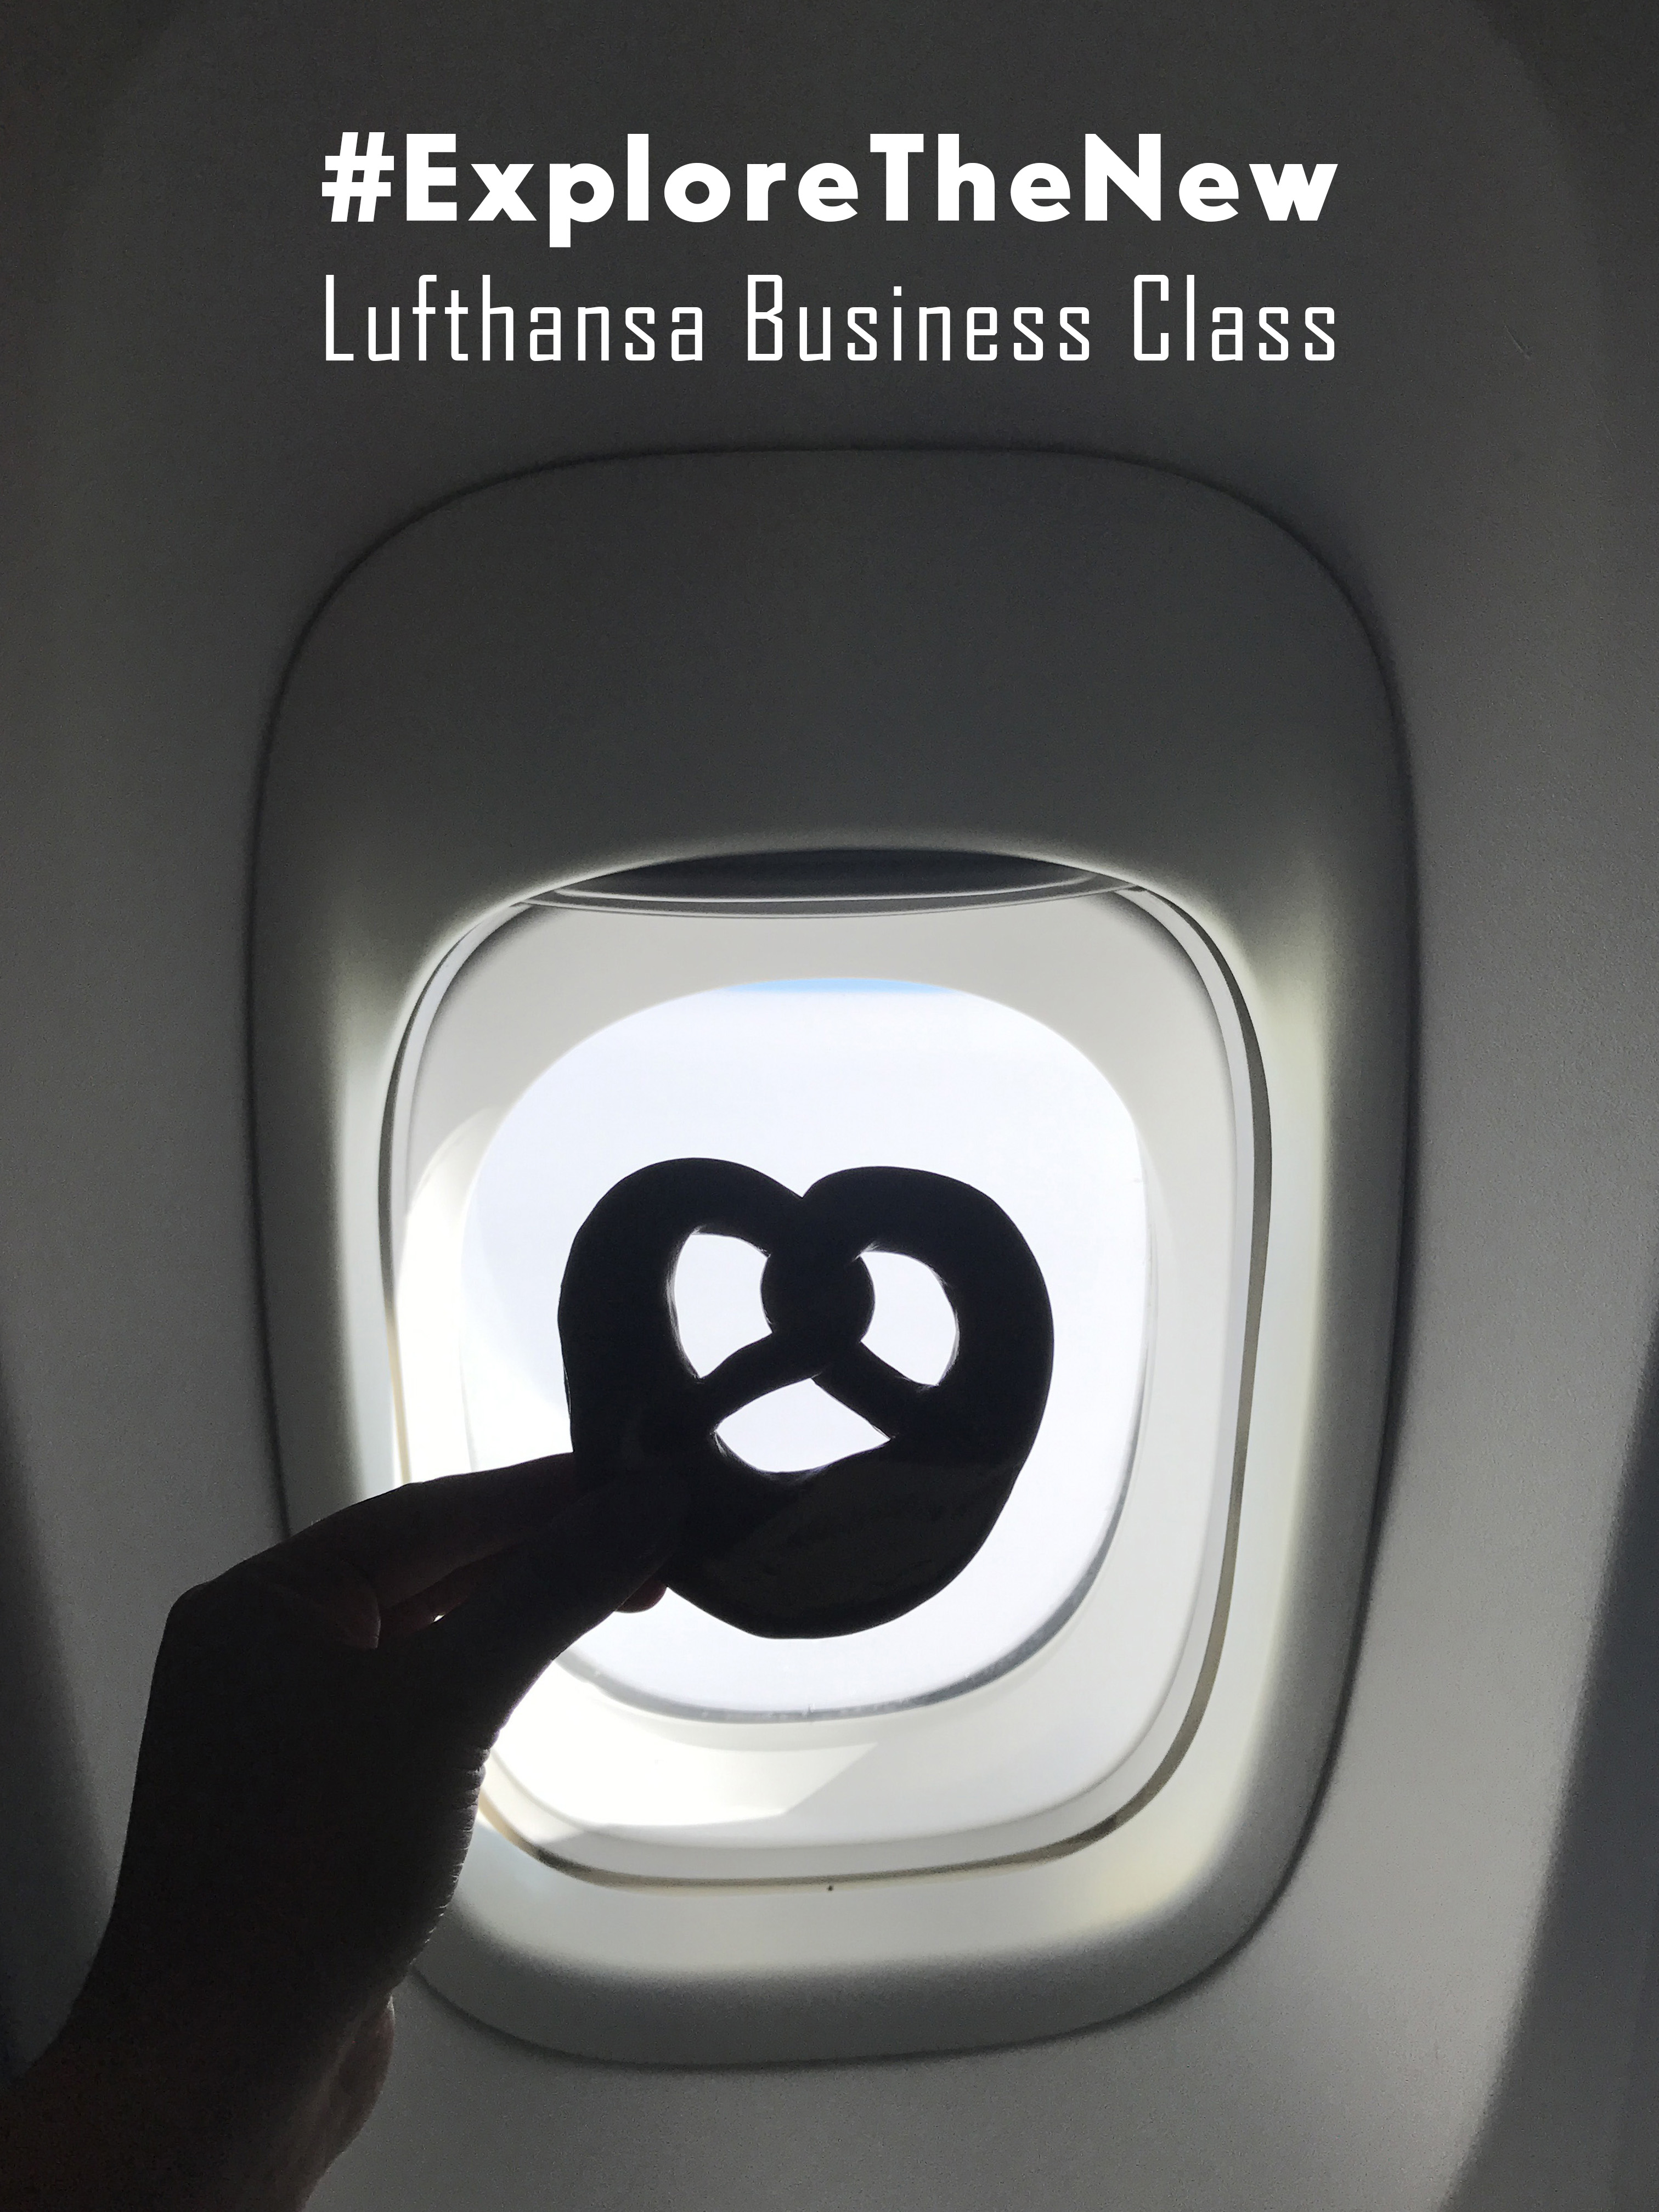 Lufthansa Business Class Flight Review with New Livery and Logo Redesign